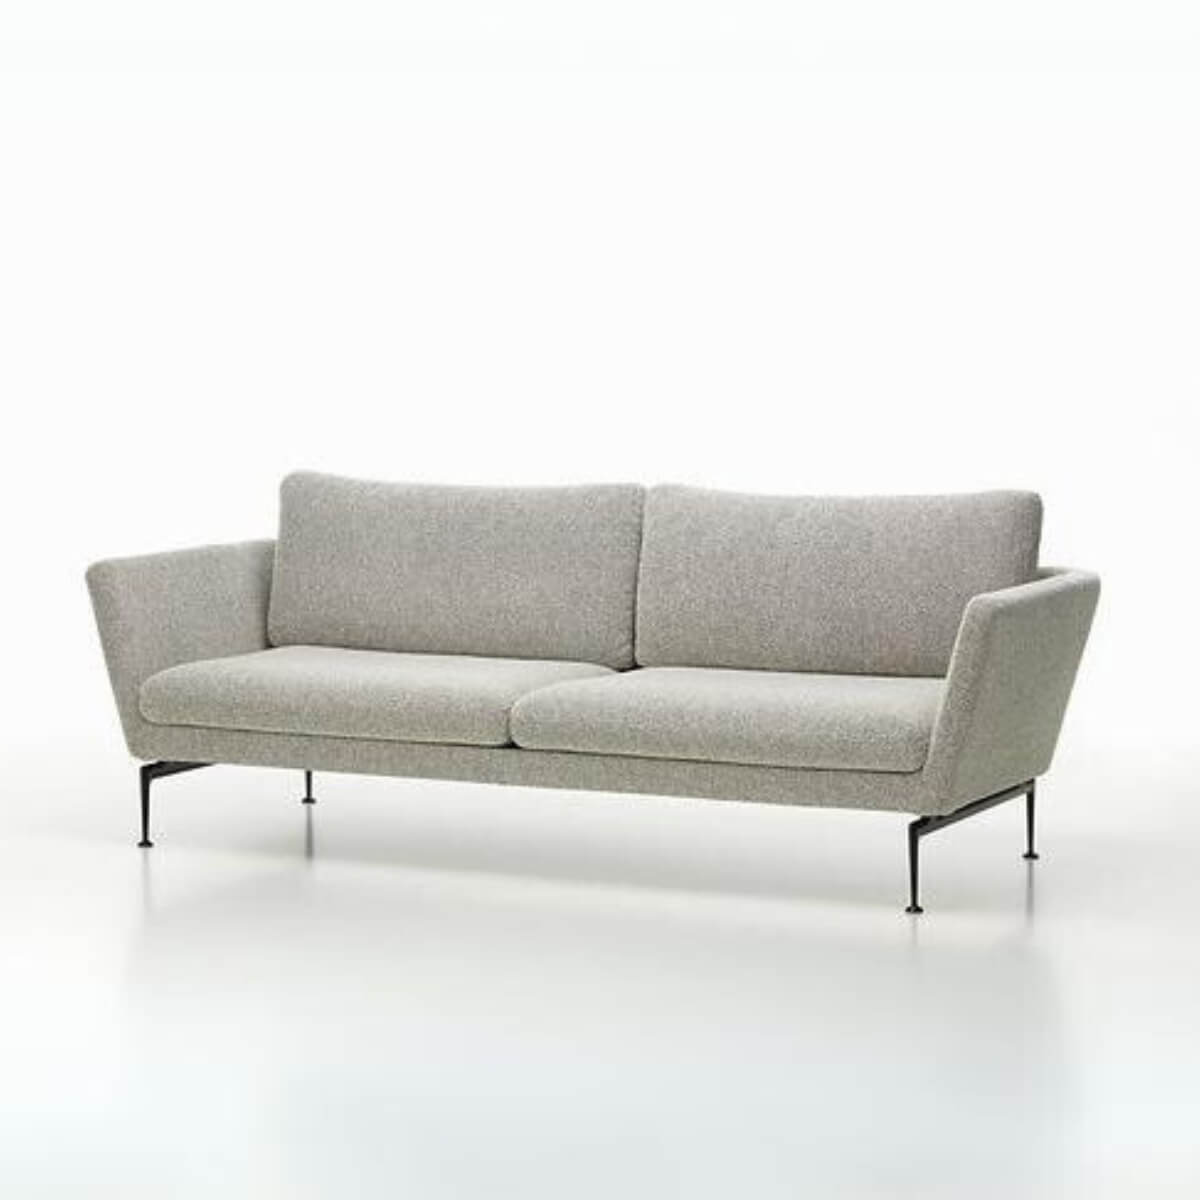 Aurora Alcove Cotton Linen Sofa - A Serene Oasis of Comfort and Style